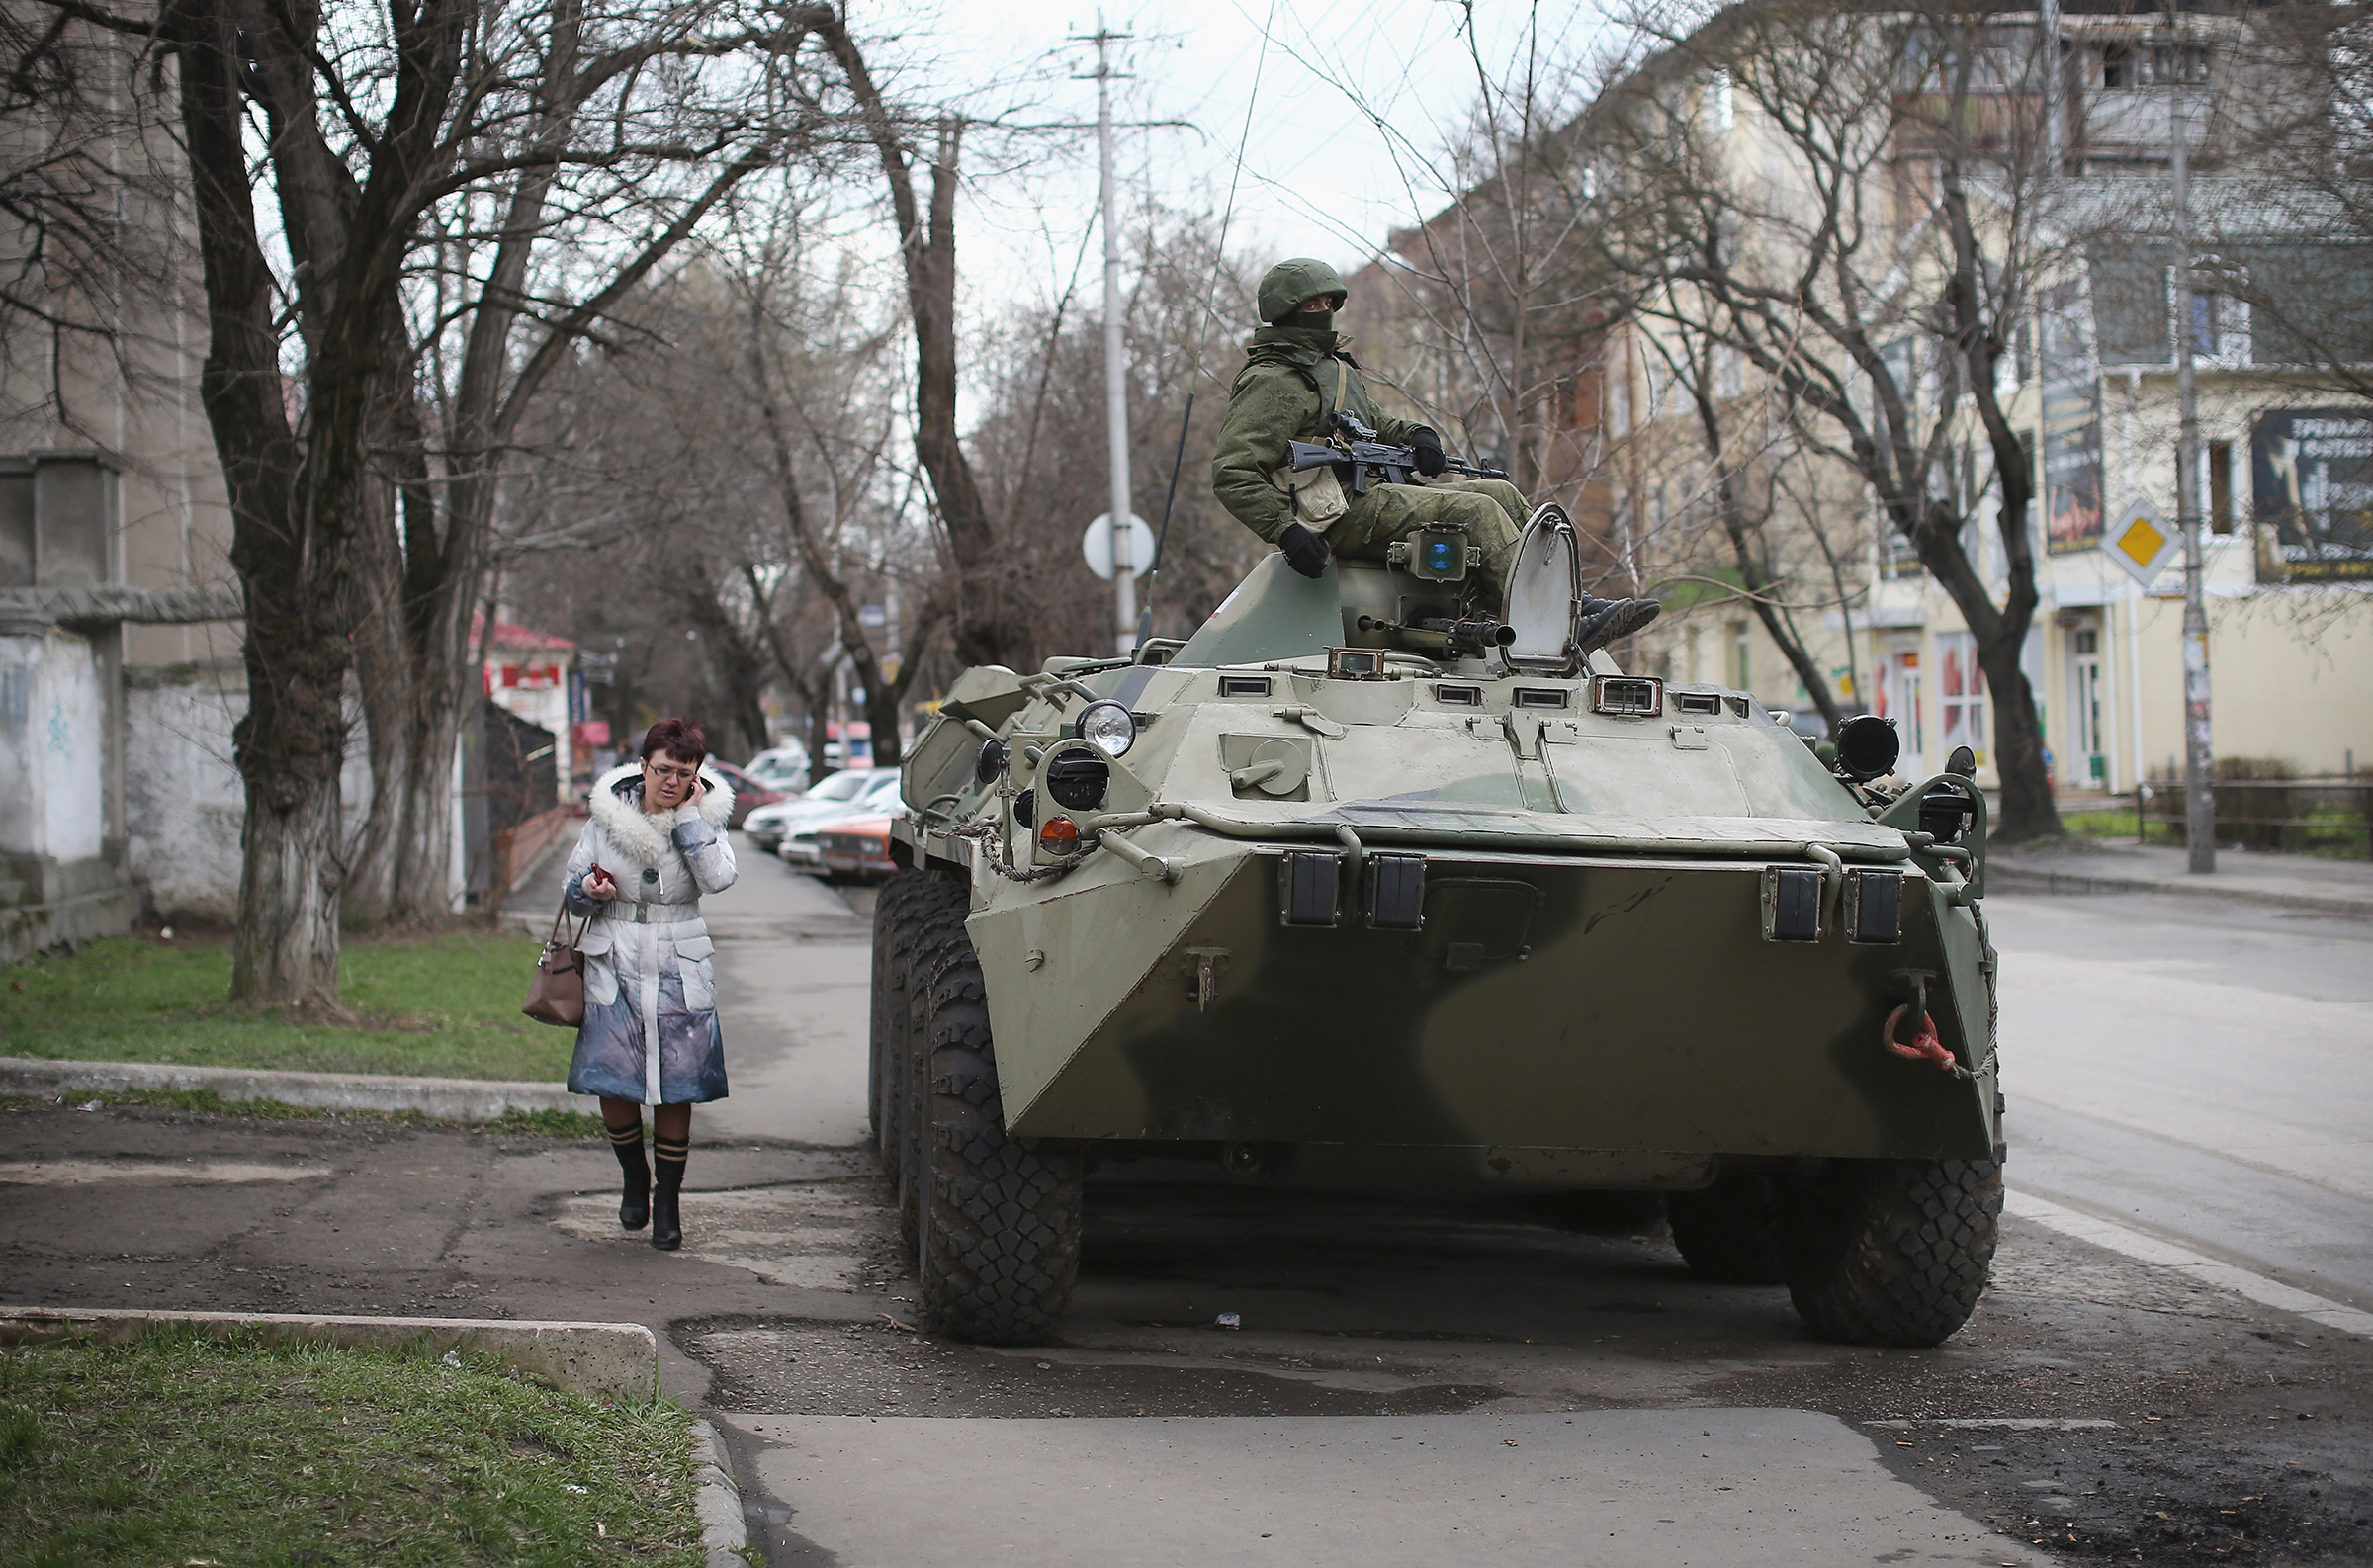 A woman walks past a Russian military personnel carrier outside a Ukrainian military base on March 18, 2014 in Simferopol, Ukraine. Voters on the autonomous Ukrainian peninsular of Crimea voted overwhelmingly yesterday to secede from their country and join Russia. (Dan Kitwood—Getty Images)